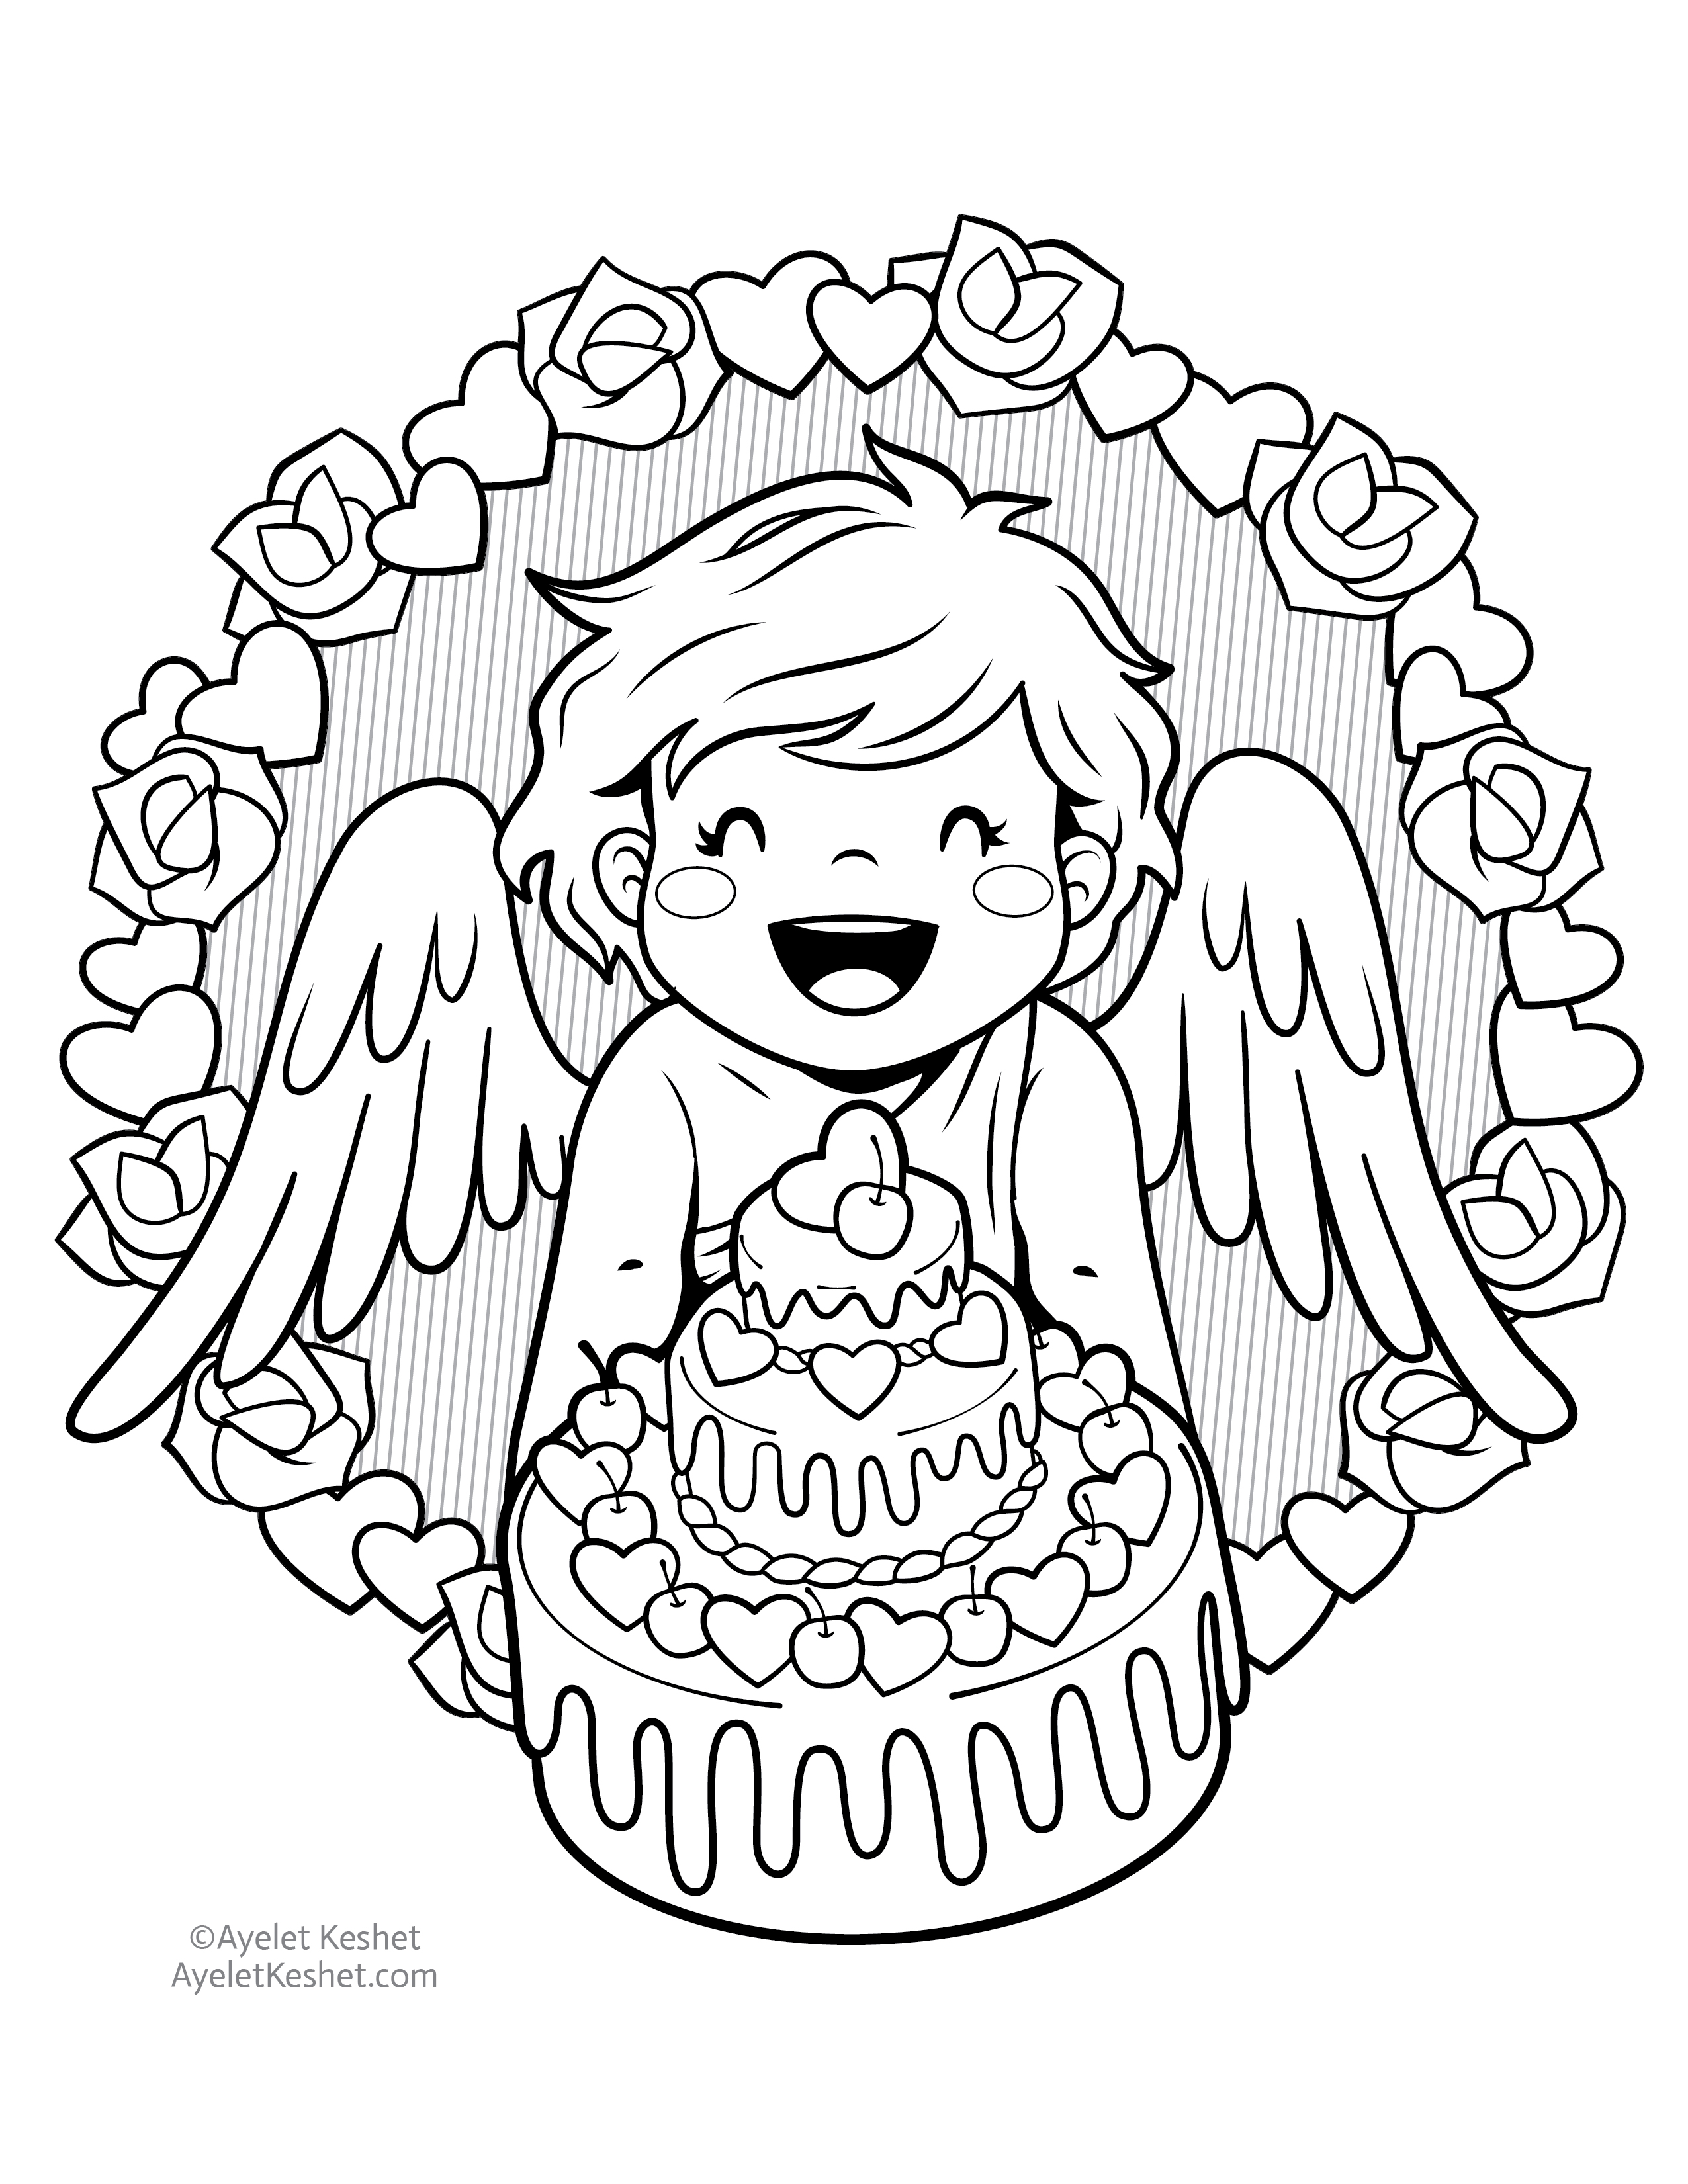 Free printable Valentine's Day coloring pages - Ayelet Keshet